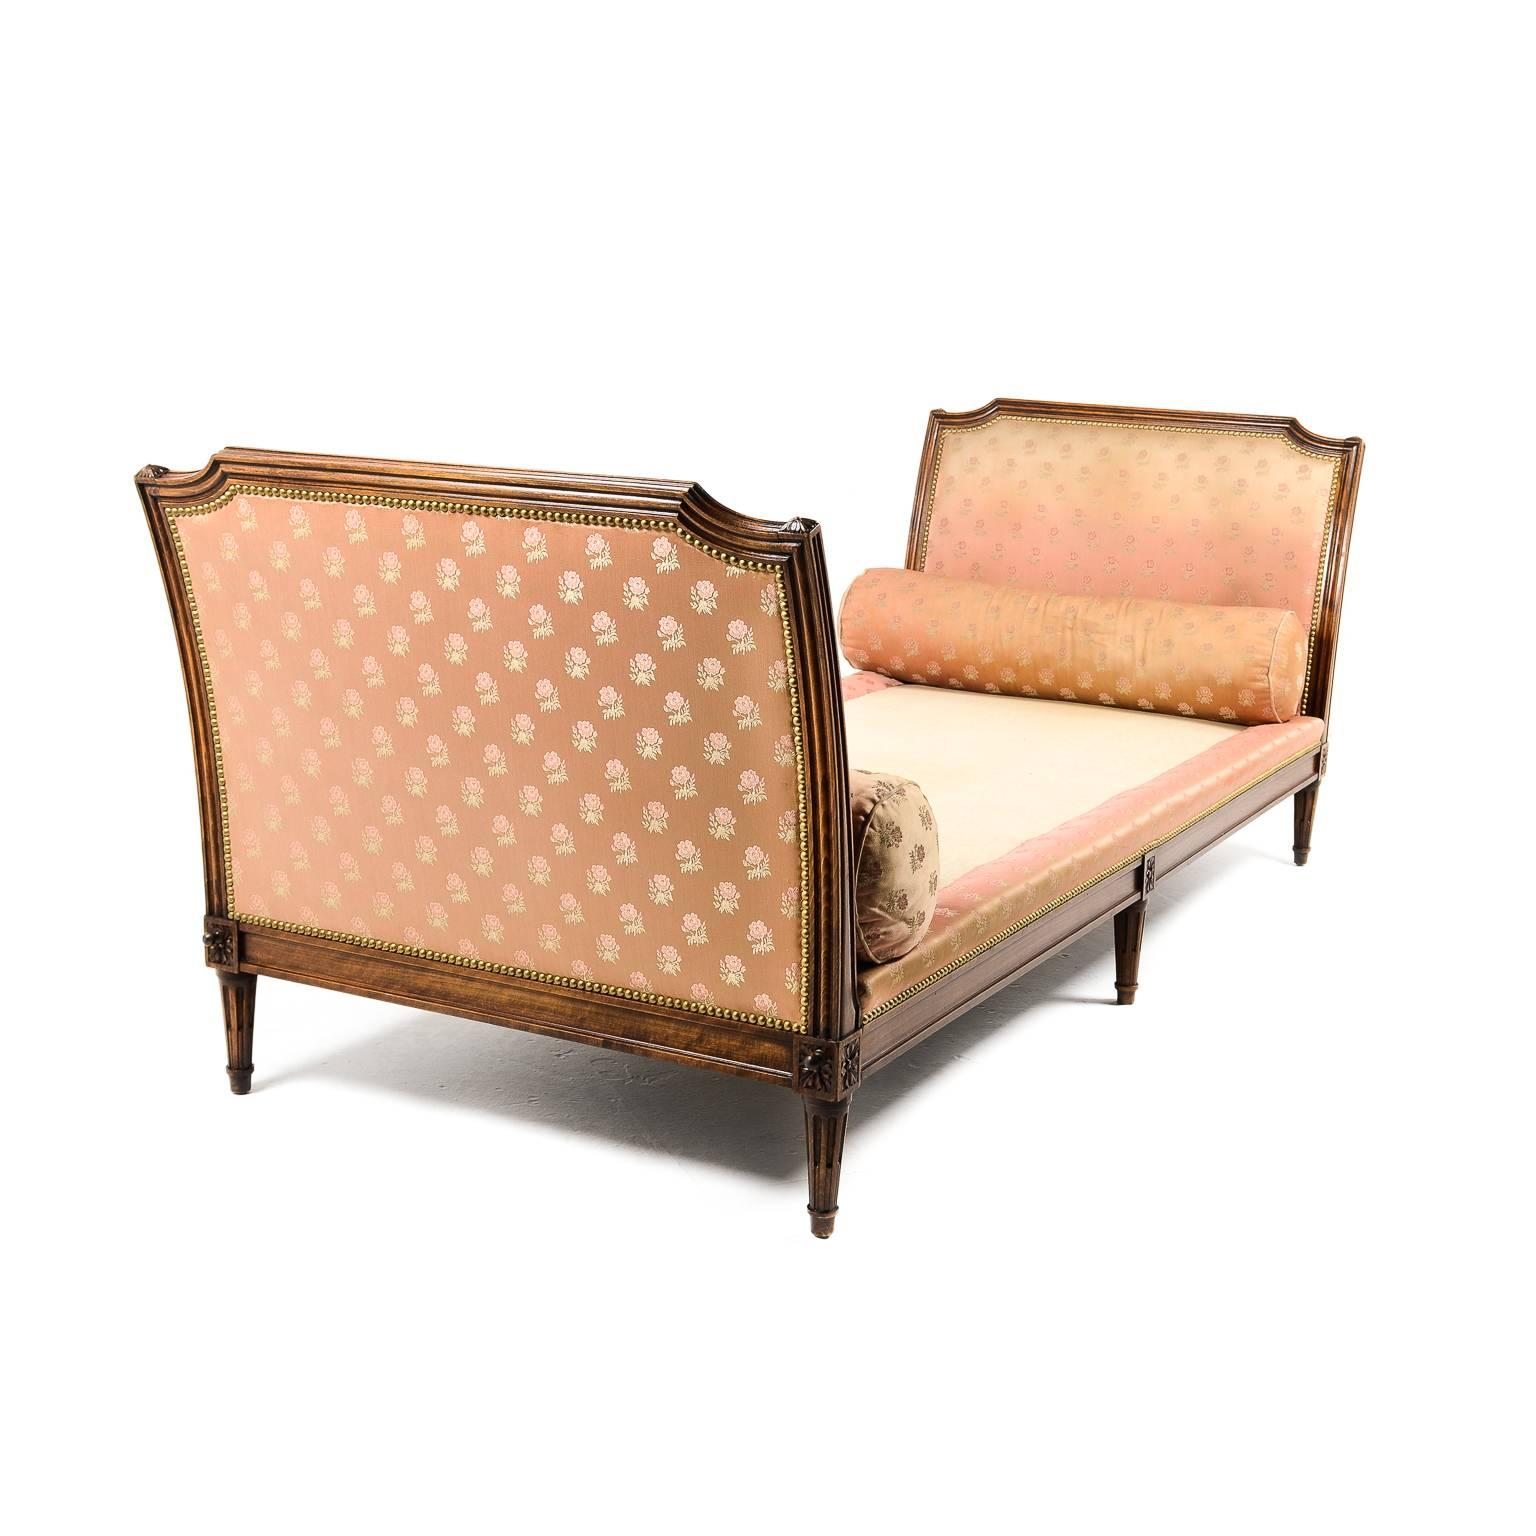 Early 20th Century French Walnut Directoire-Style Daybed from Paris, Circa 1920